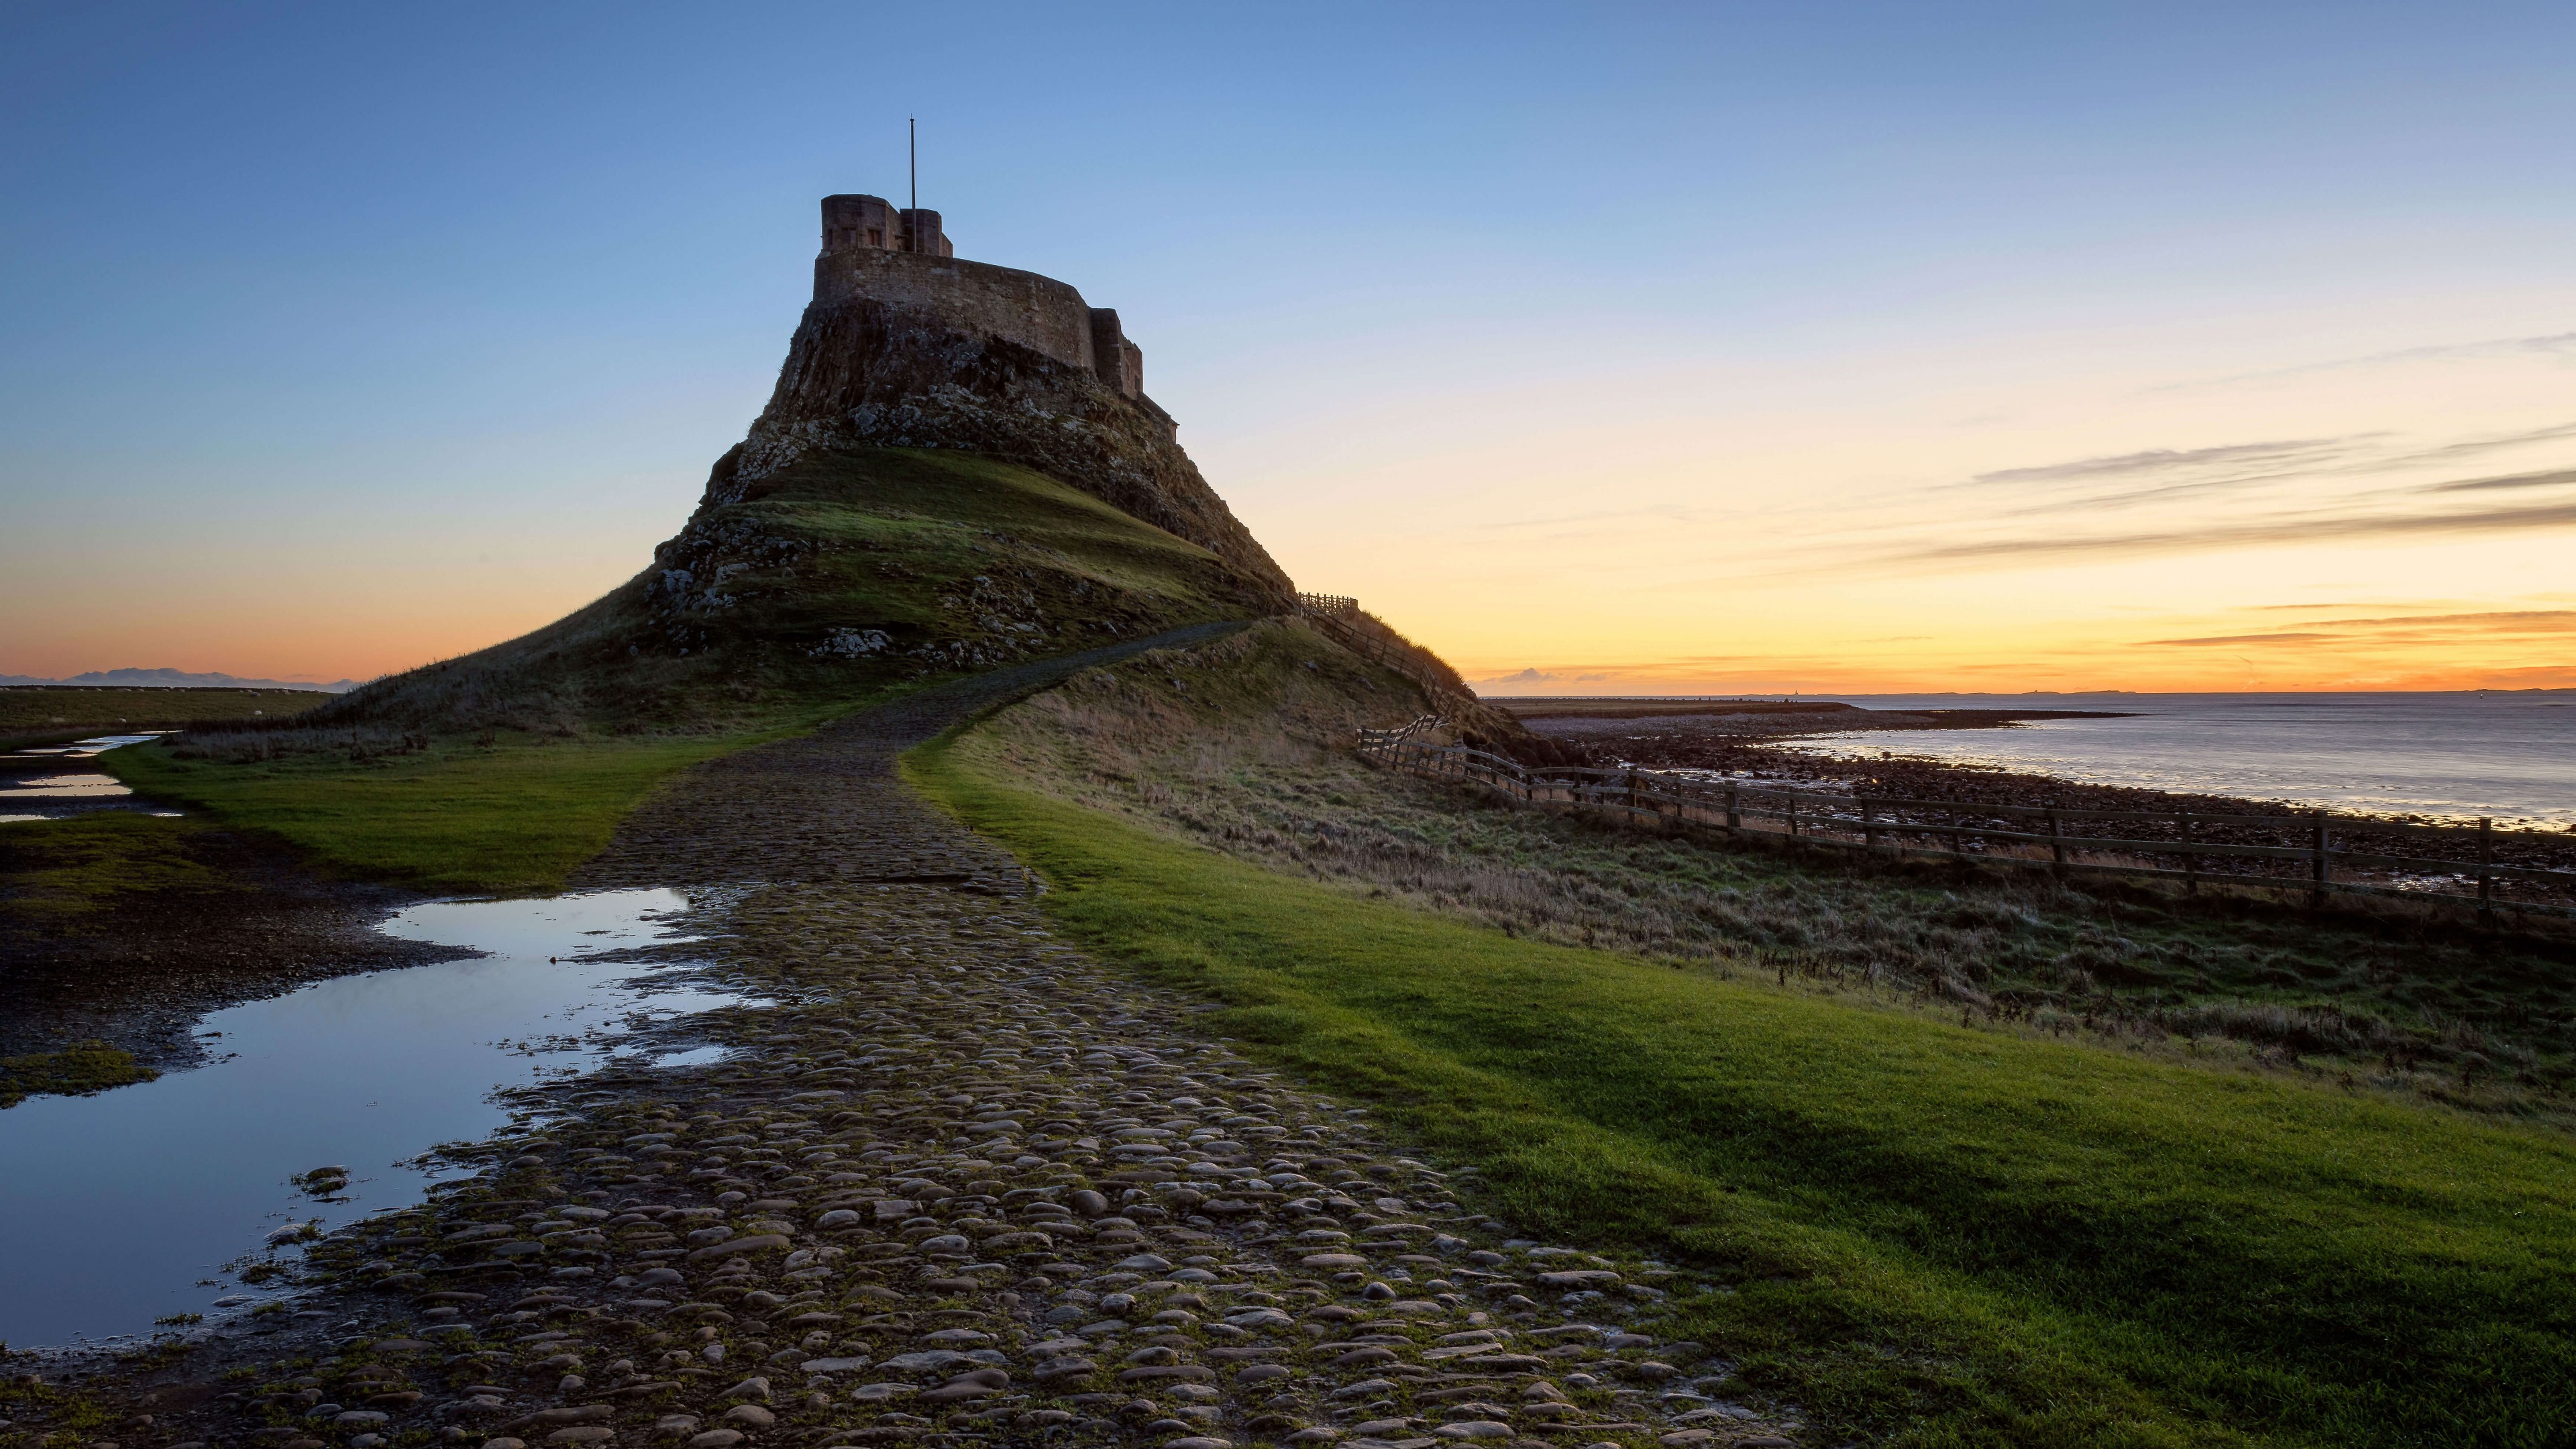 Northumberland Castle Wallpapers